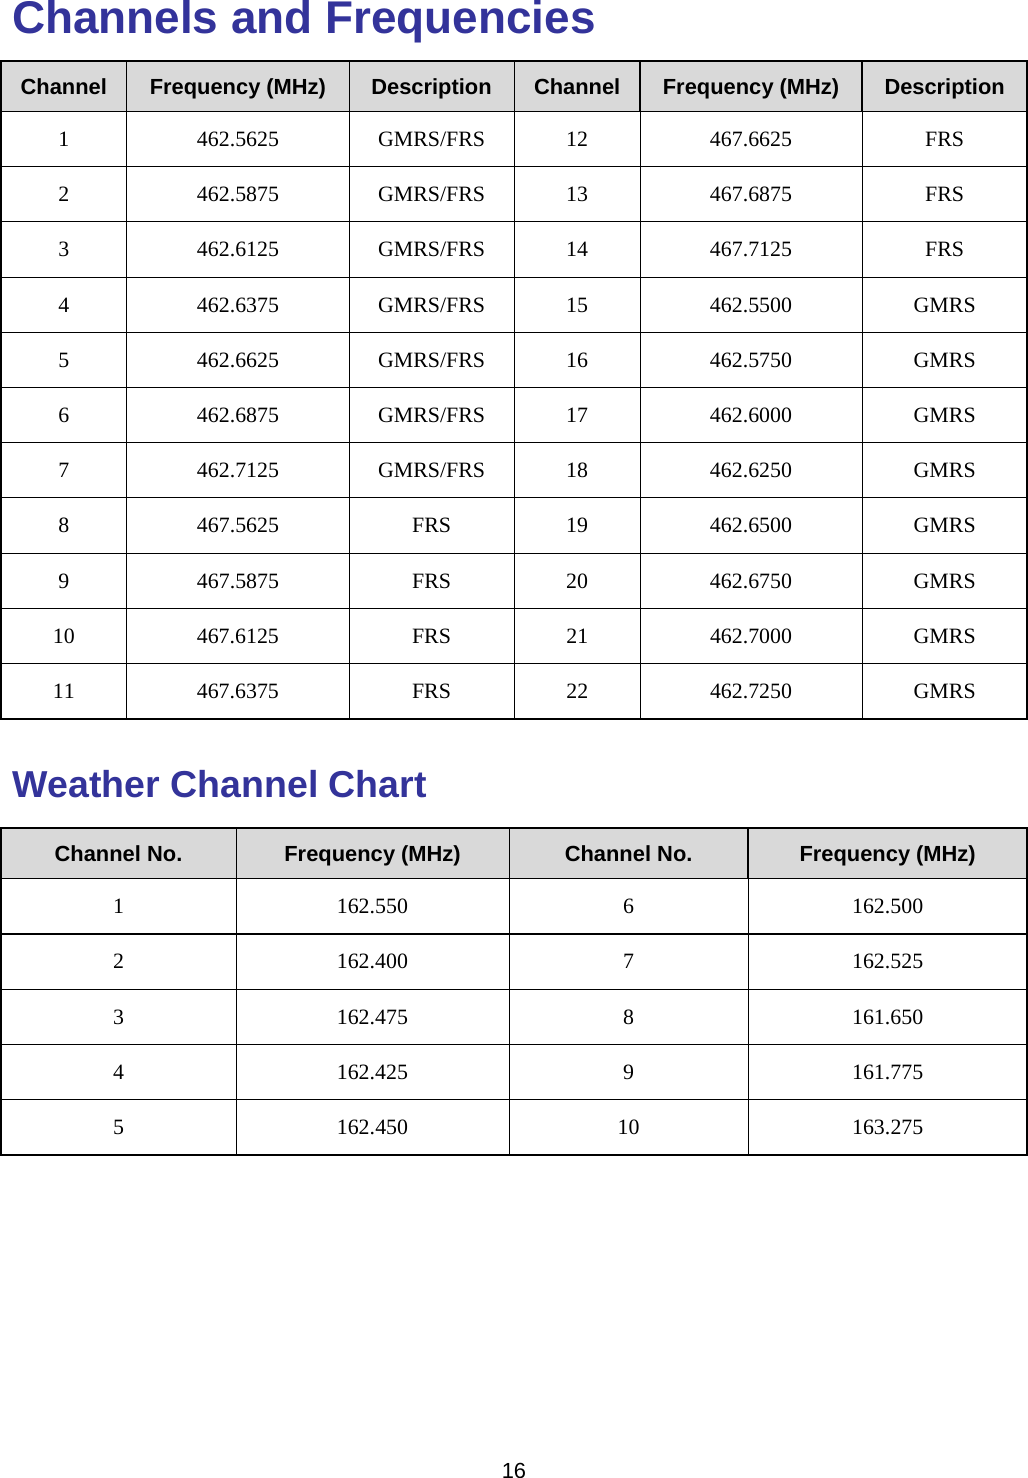  16  Channels and Frequencies Channel  Frequency (MHz)  Description  Channel  Frequency (MHz)  Description 1 462.5625 GMRS/FRS 12 467.6625  FRS 2 462.5875 GMRS/FRS 13 467.6875  FRS 3 462.6125 GMRS/FRS 14 467.7125  FRS 4 462.6375 GMRS/FRS 15 462.5500 GMRS 5 462.6625 GMRS/FRS 16 462.5750 GMRS 6 462.6875 GMRS/FRS 17 462.6000 GMRS 7 462.7125 GMRS/FRS 18 462.6250 GMRS 8 467.5625  FRS 19 462.6500 GMRS 9 467.5875  FRS 20 462.6750 GMRS 10 467.6125  FRS 21 462.7000 GMRS 11 467.6375  FRS 22 462.7250 GMRS Weather Channel Chart Channel No.  Frequency (MHz)  Channel No.  Frequency (MHz) 1 162.550 6  162.500 2 162.400 7  162.525 3 162.475 8  161.650 4 162.425 9  161.775 5 162.450 10 163.275  